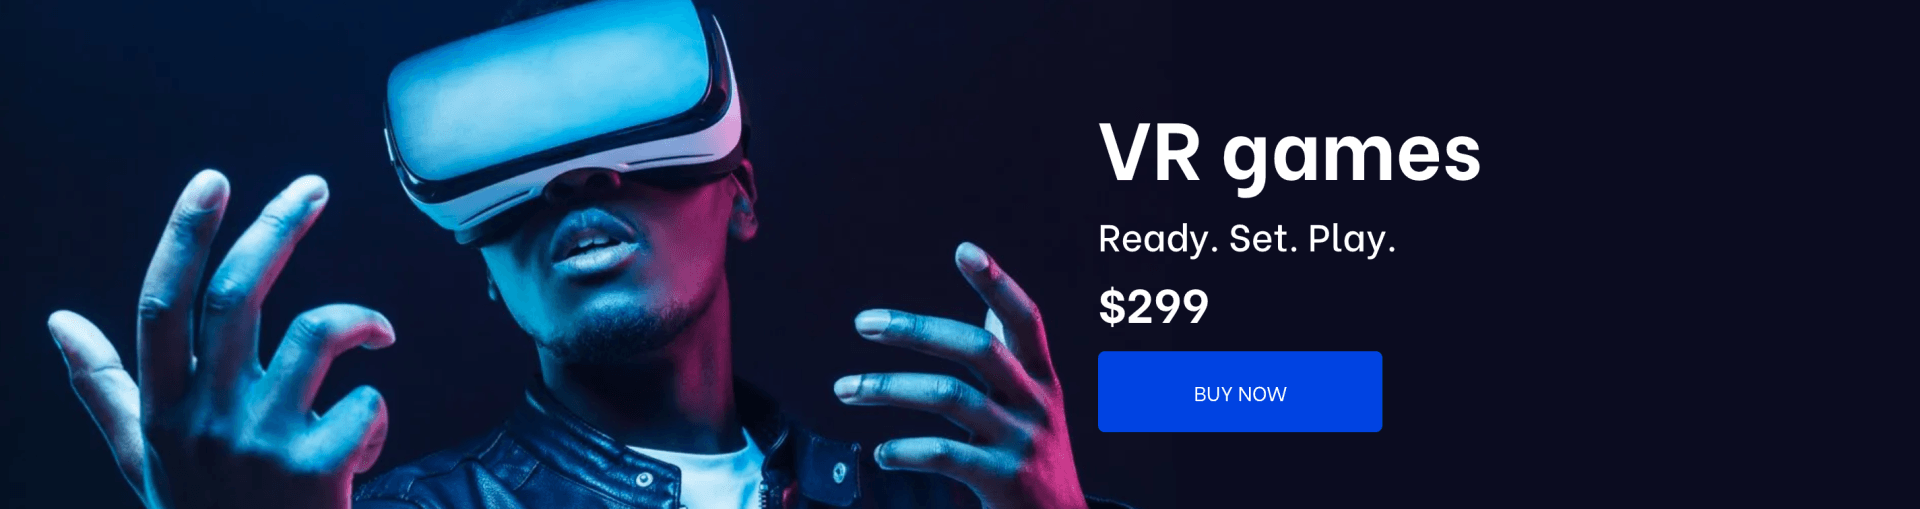 An image of a man wearing a VR headset accenting the text 